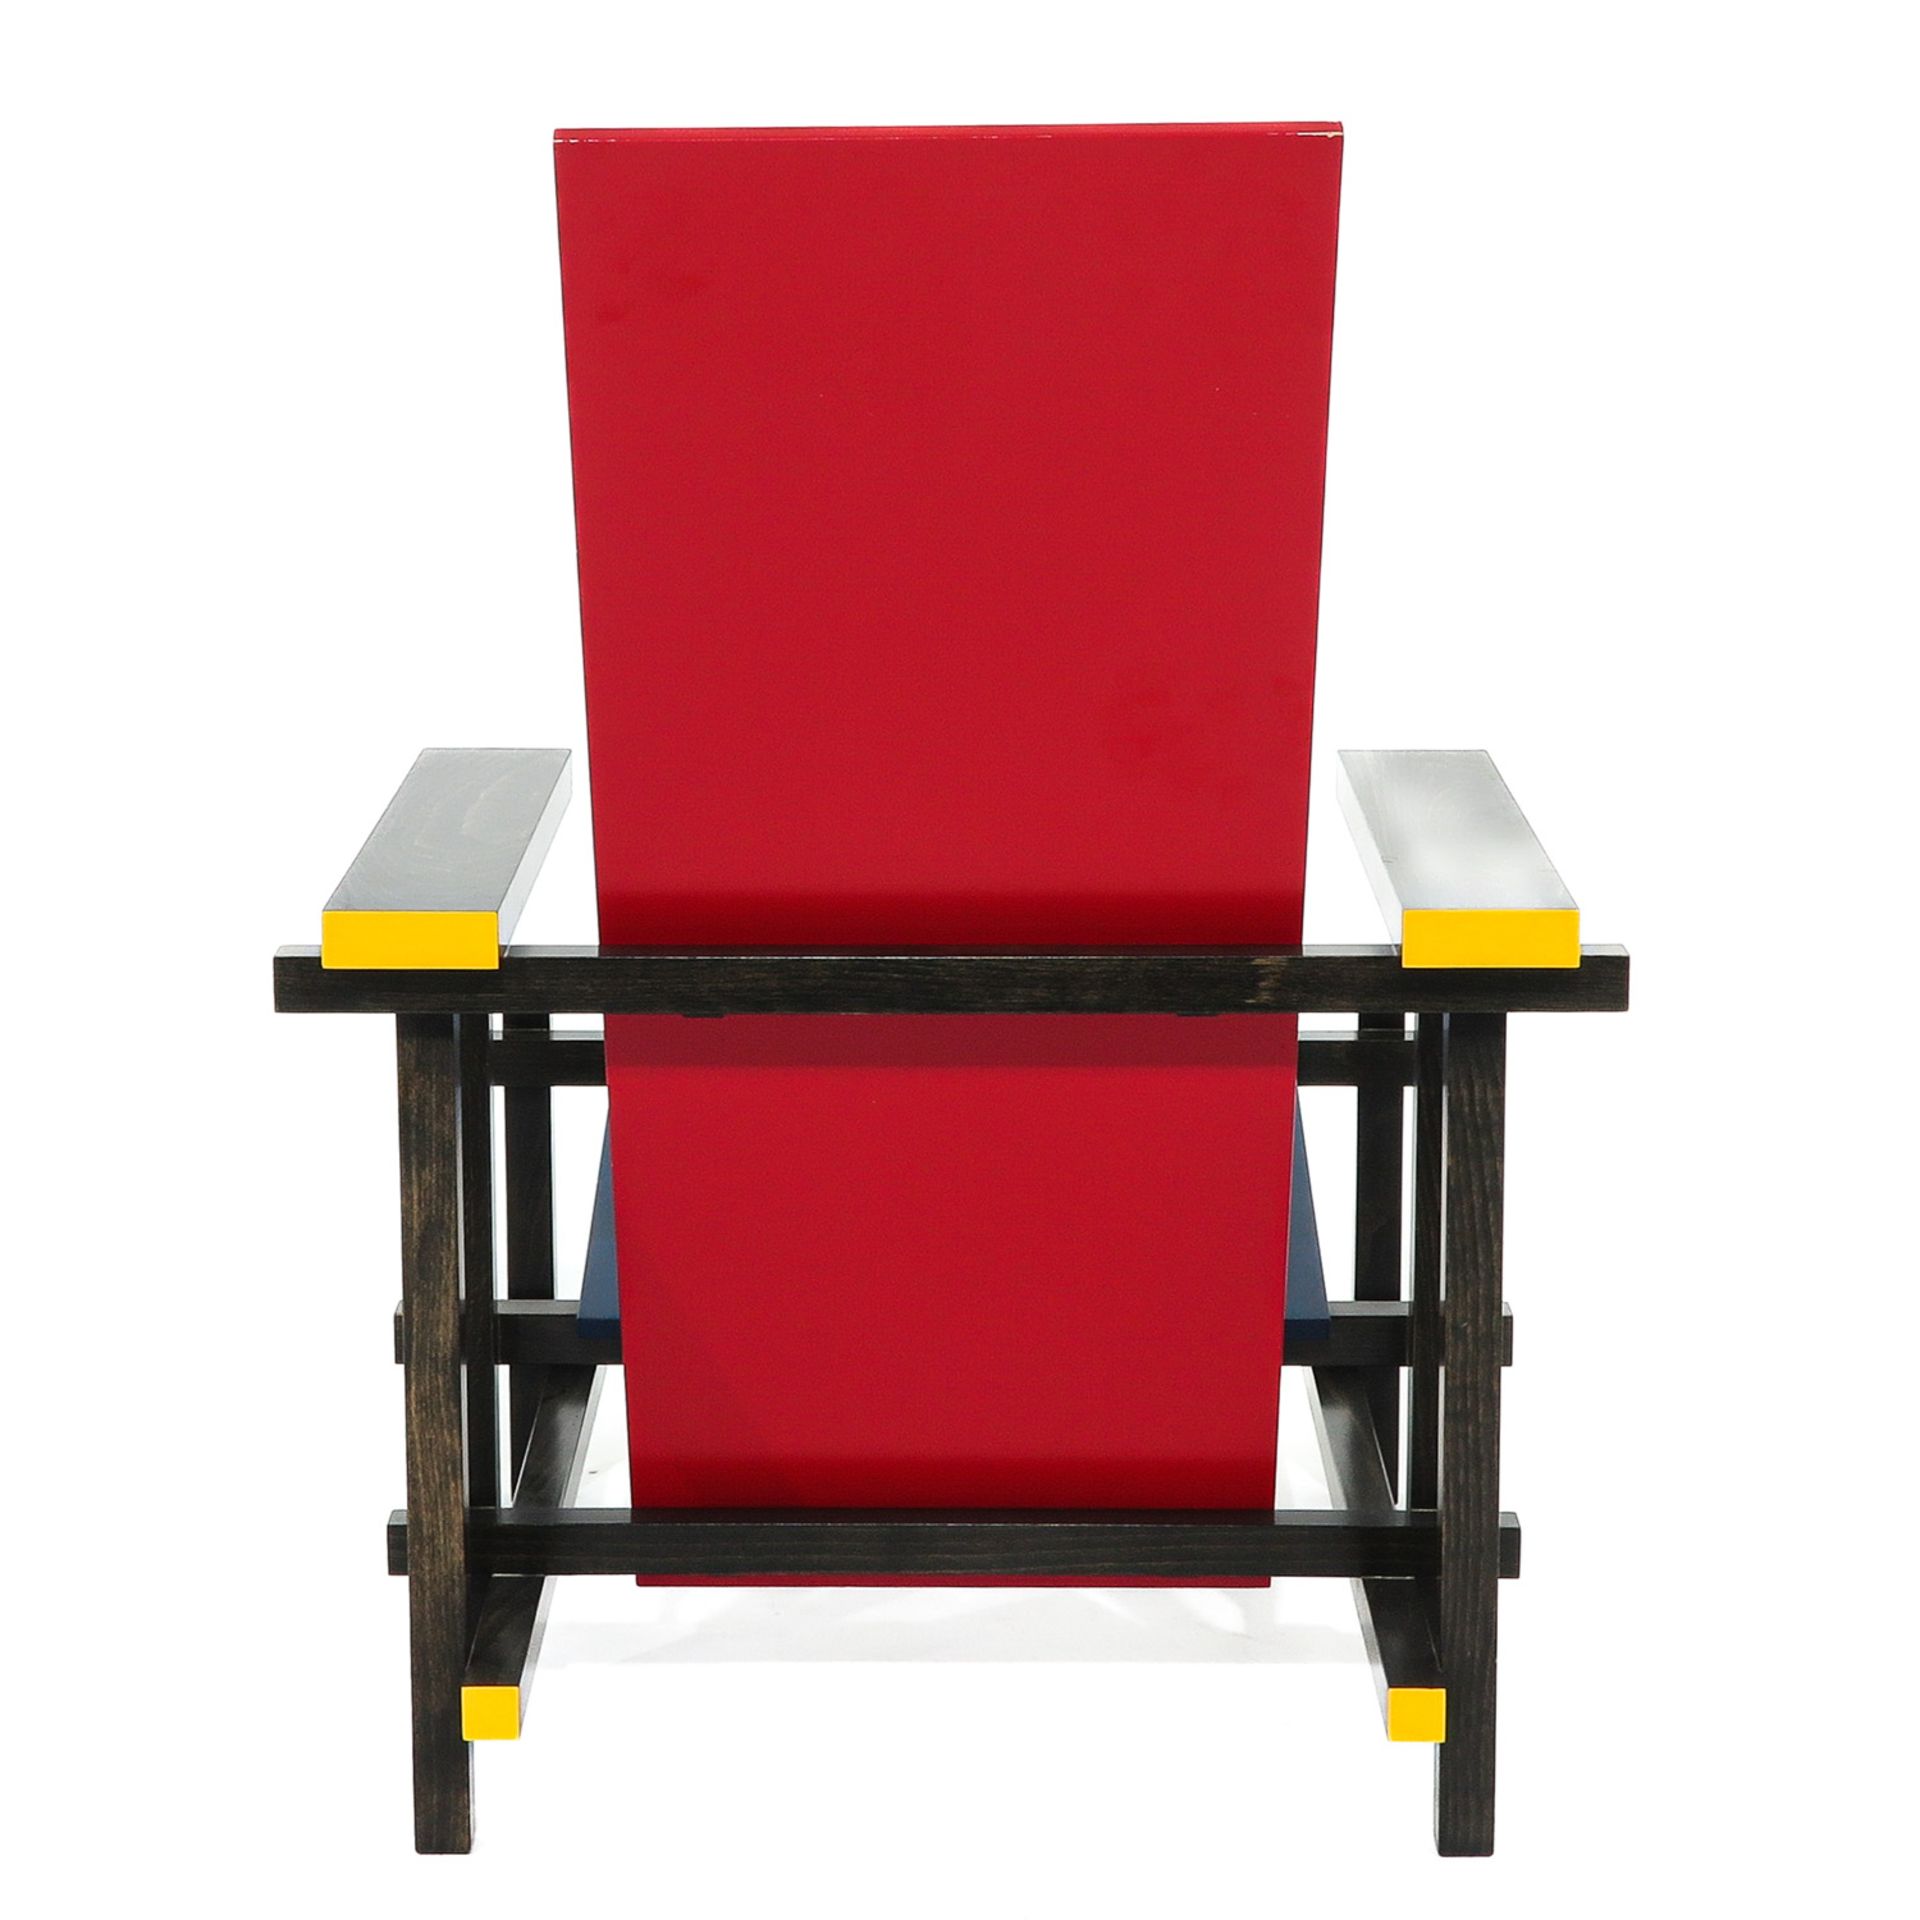 A Gerrit Rietveld Fauteuil - Image 3 of 10